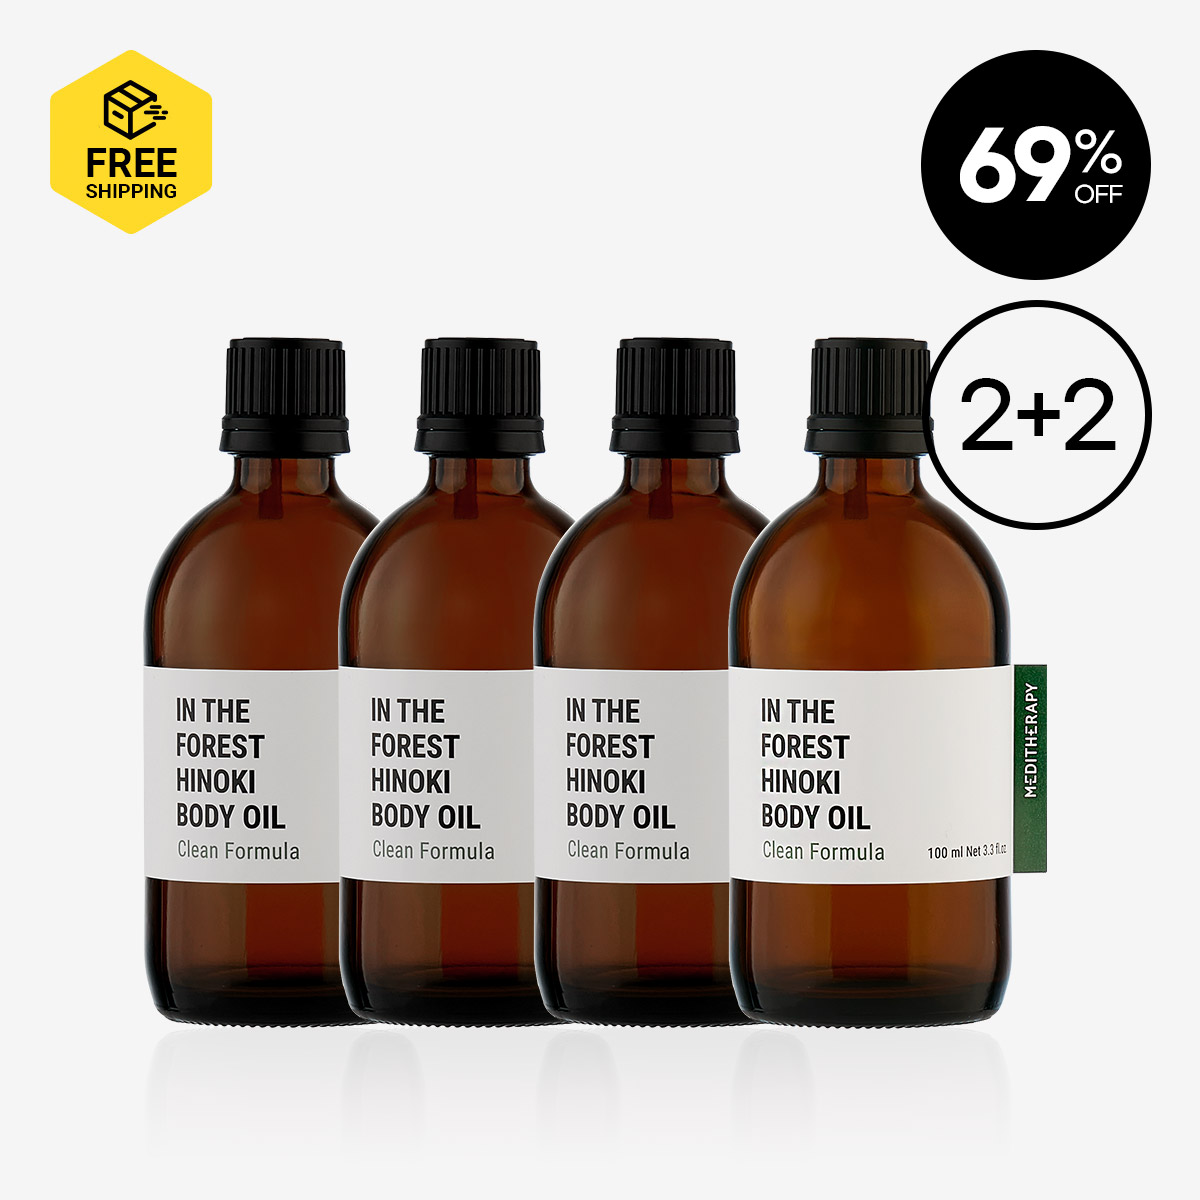 [MEDITHERAPY] IN THE FOREST HINOKI BODY OIL 2+2